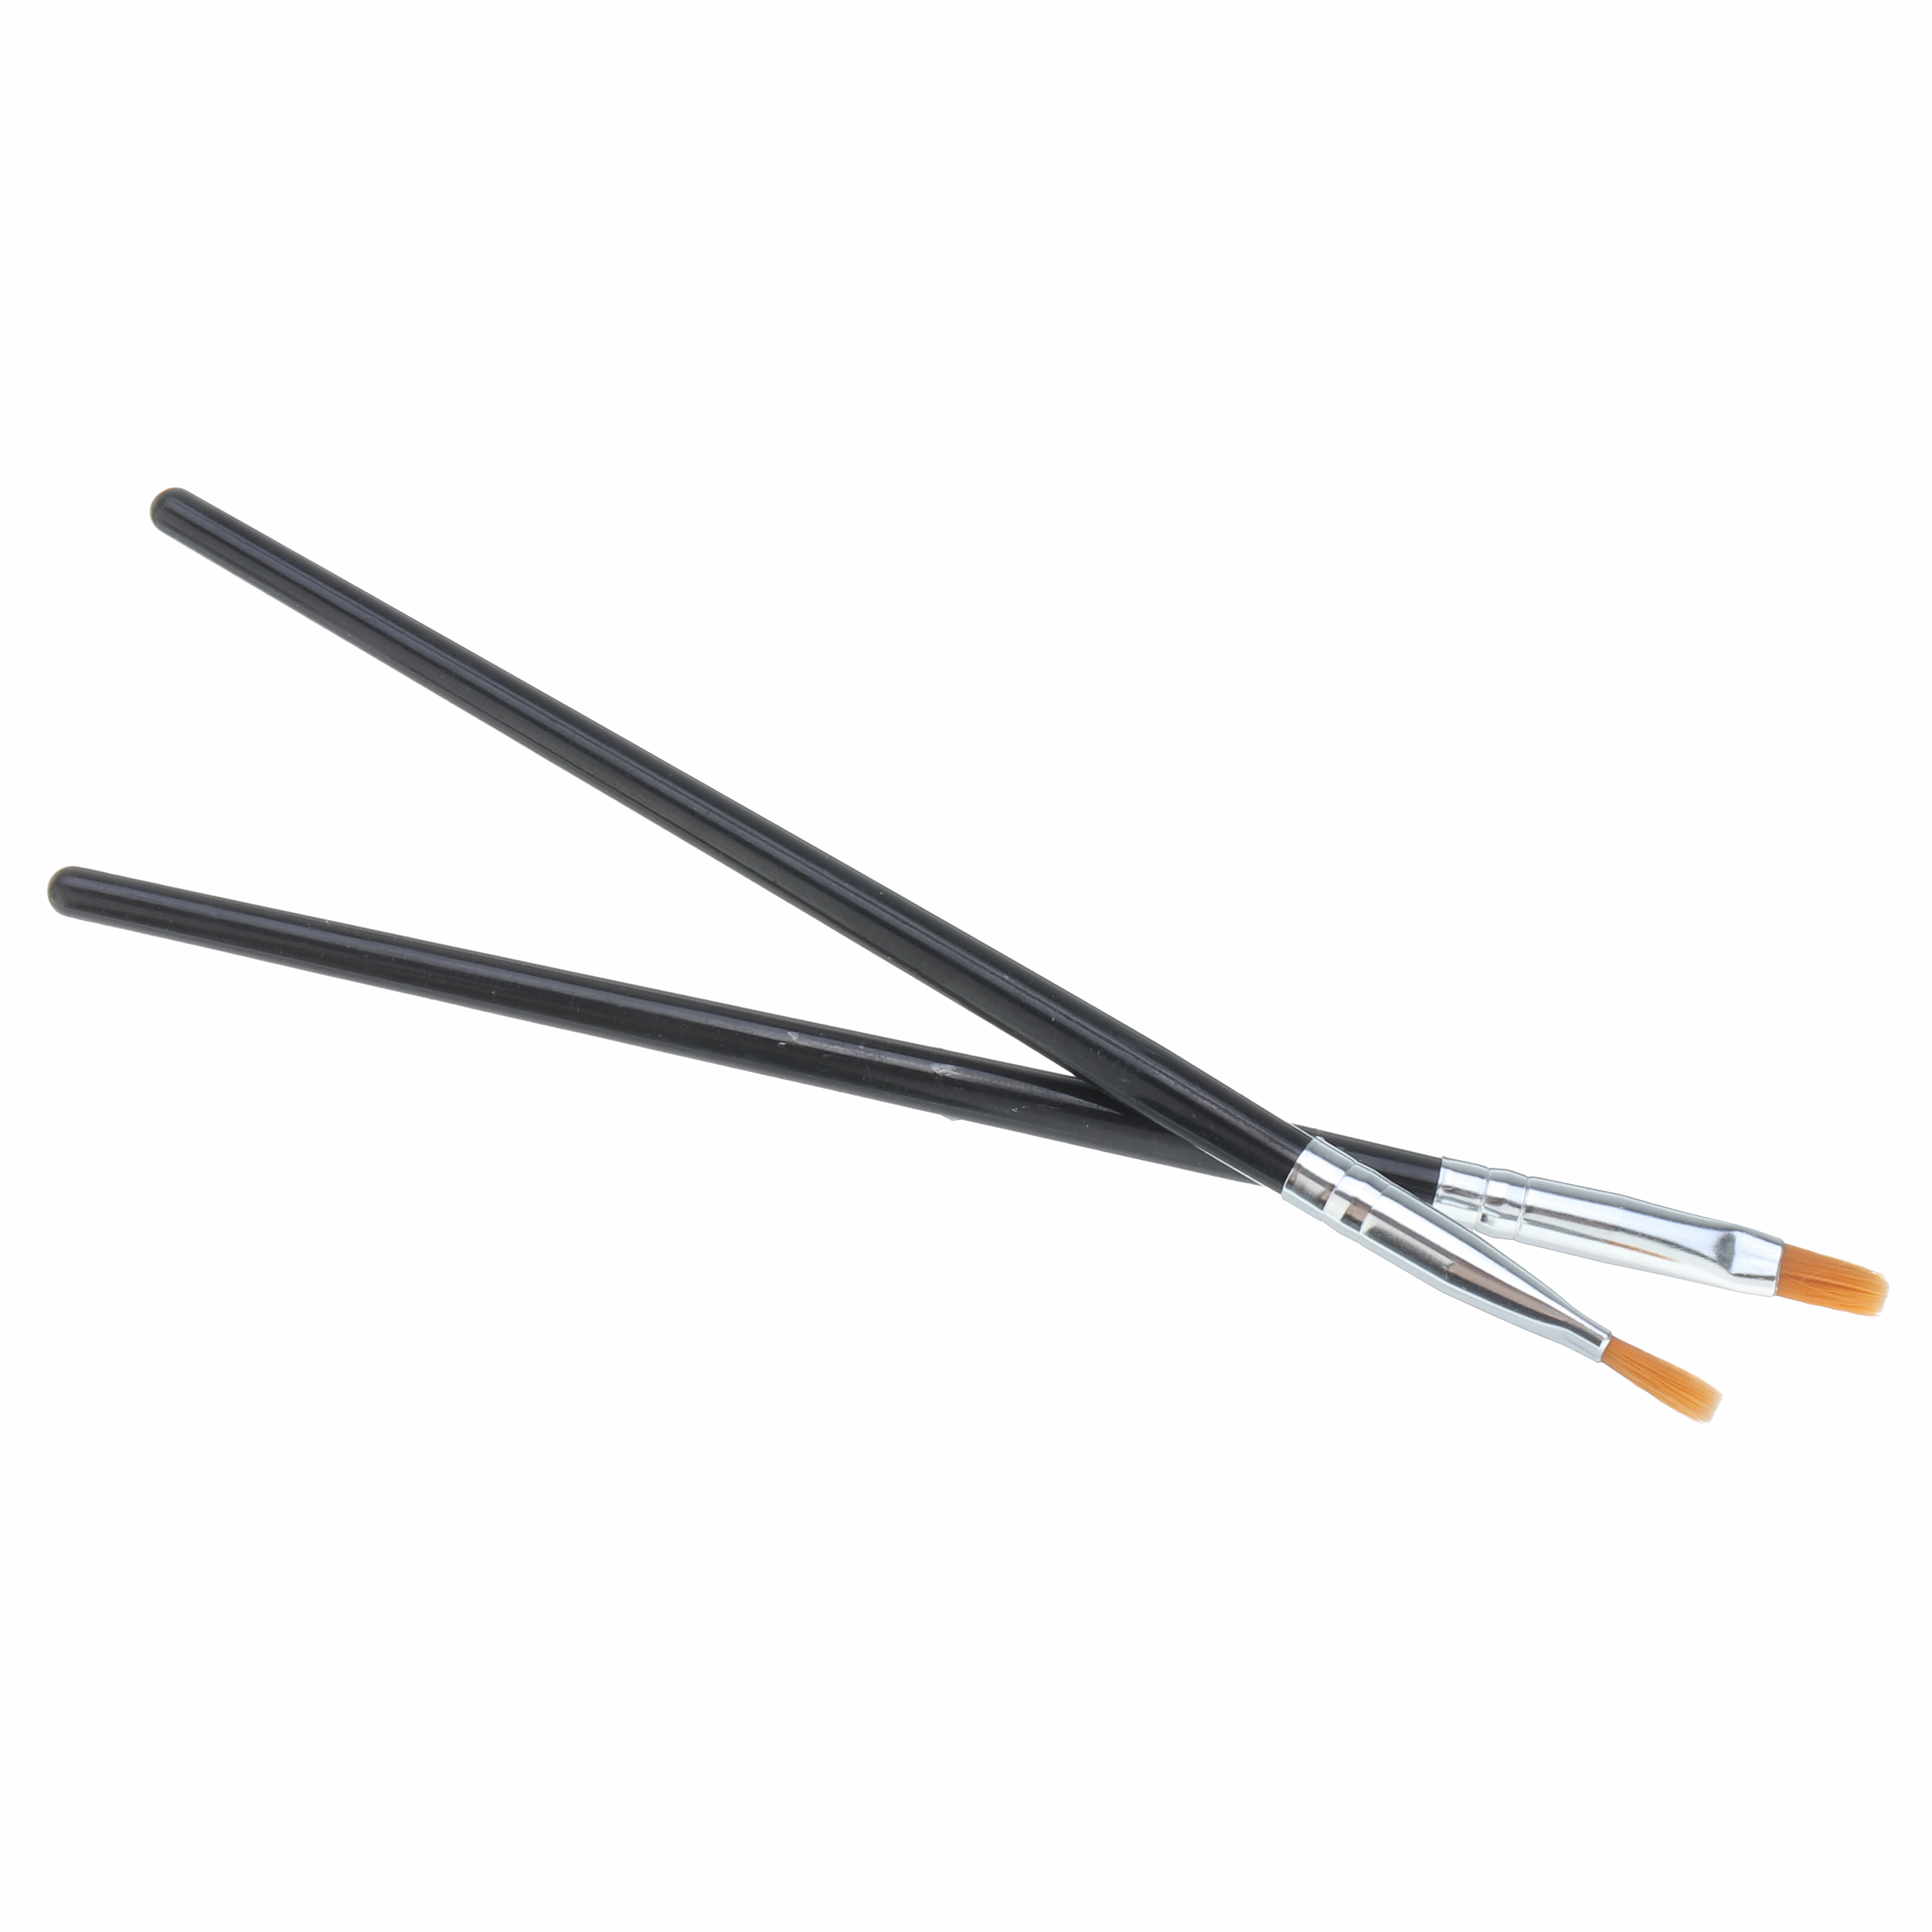 2Pcs-Model-Color-Pen-Flat-Brush-Hand-Painting-Tools-for-Oil-Painting-Pigments-1488409-7